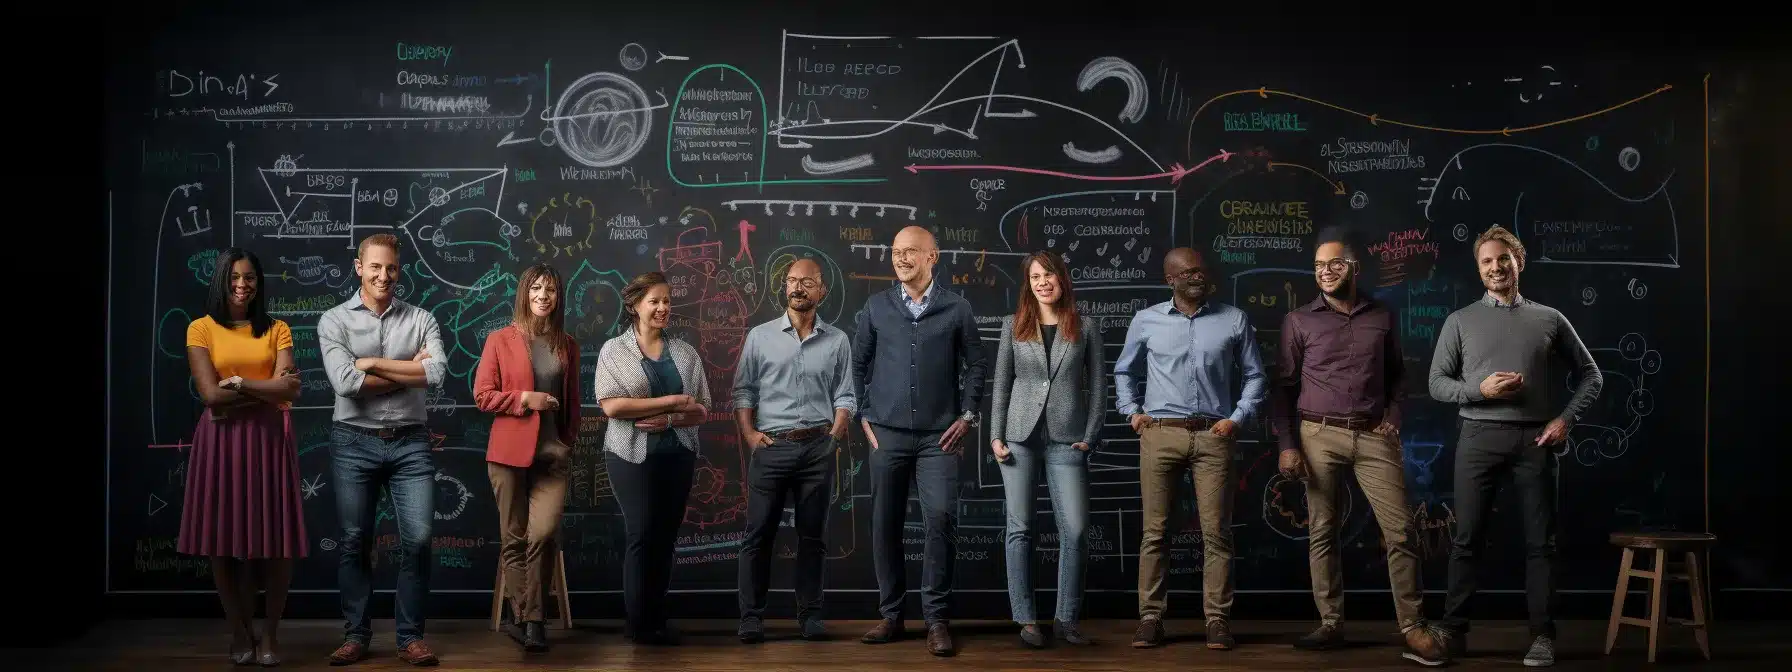 A Group Of Entrepreneurs Standing In Front Of A Chalkboard With Diagrams And Charts Illustrating Effective Brand Positioning Strategies For Start-Ups.